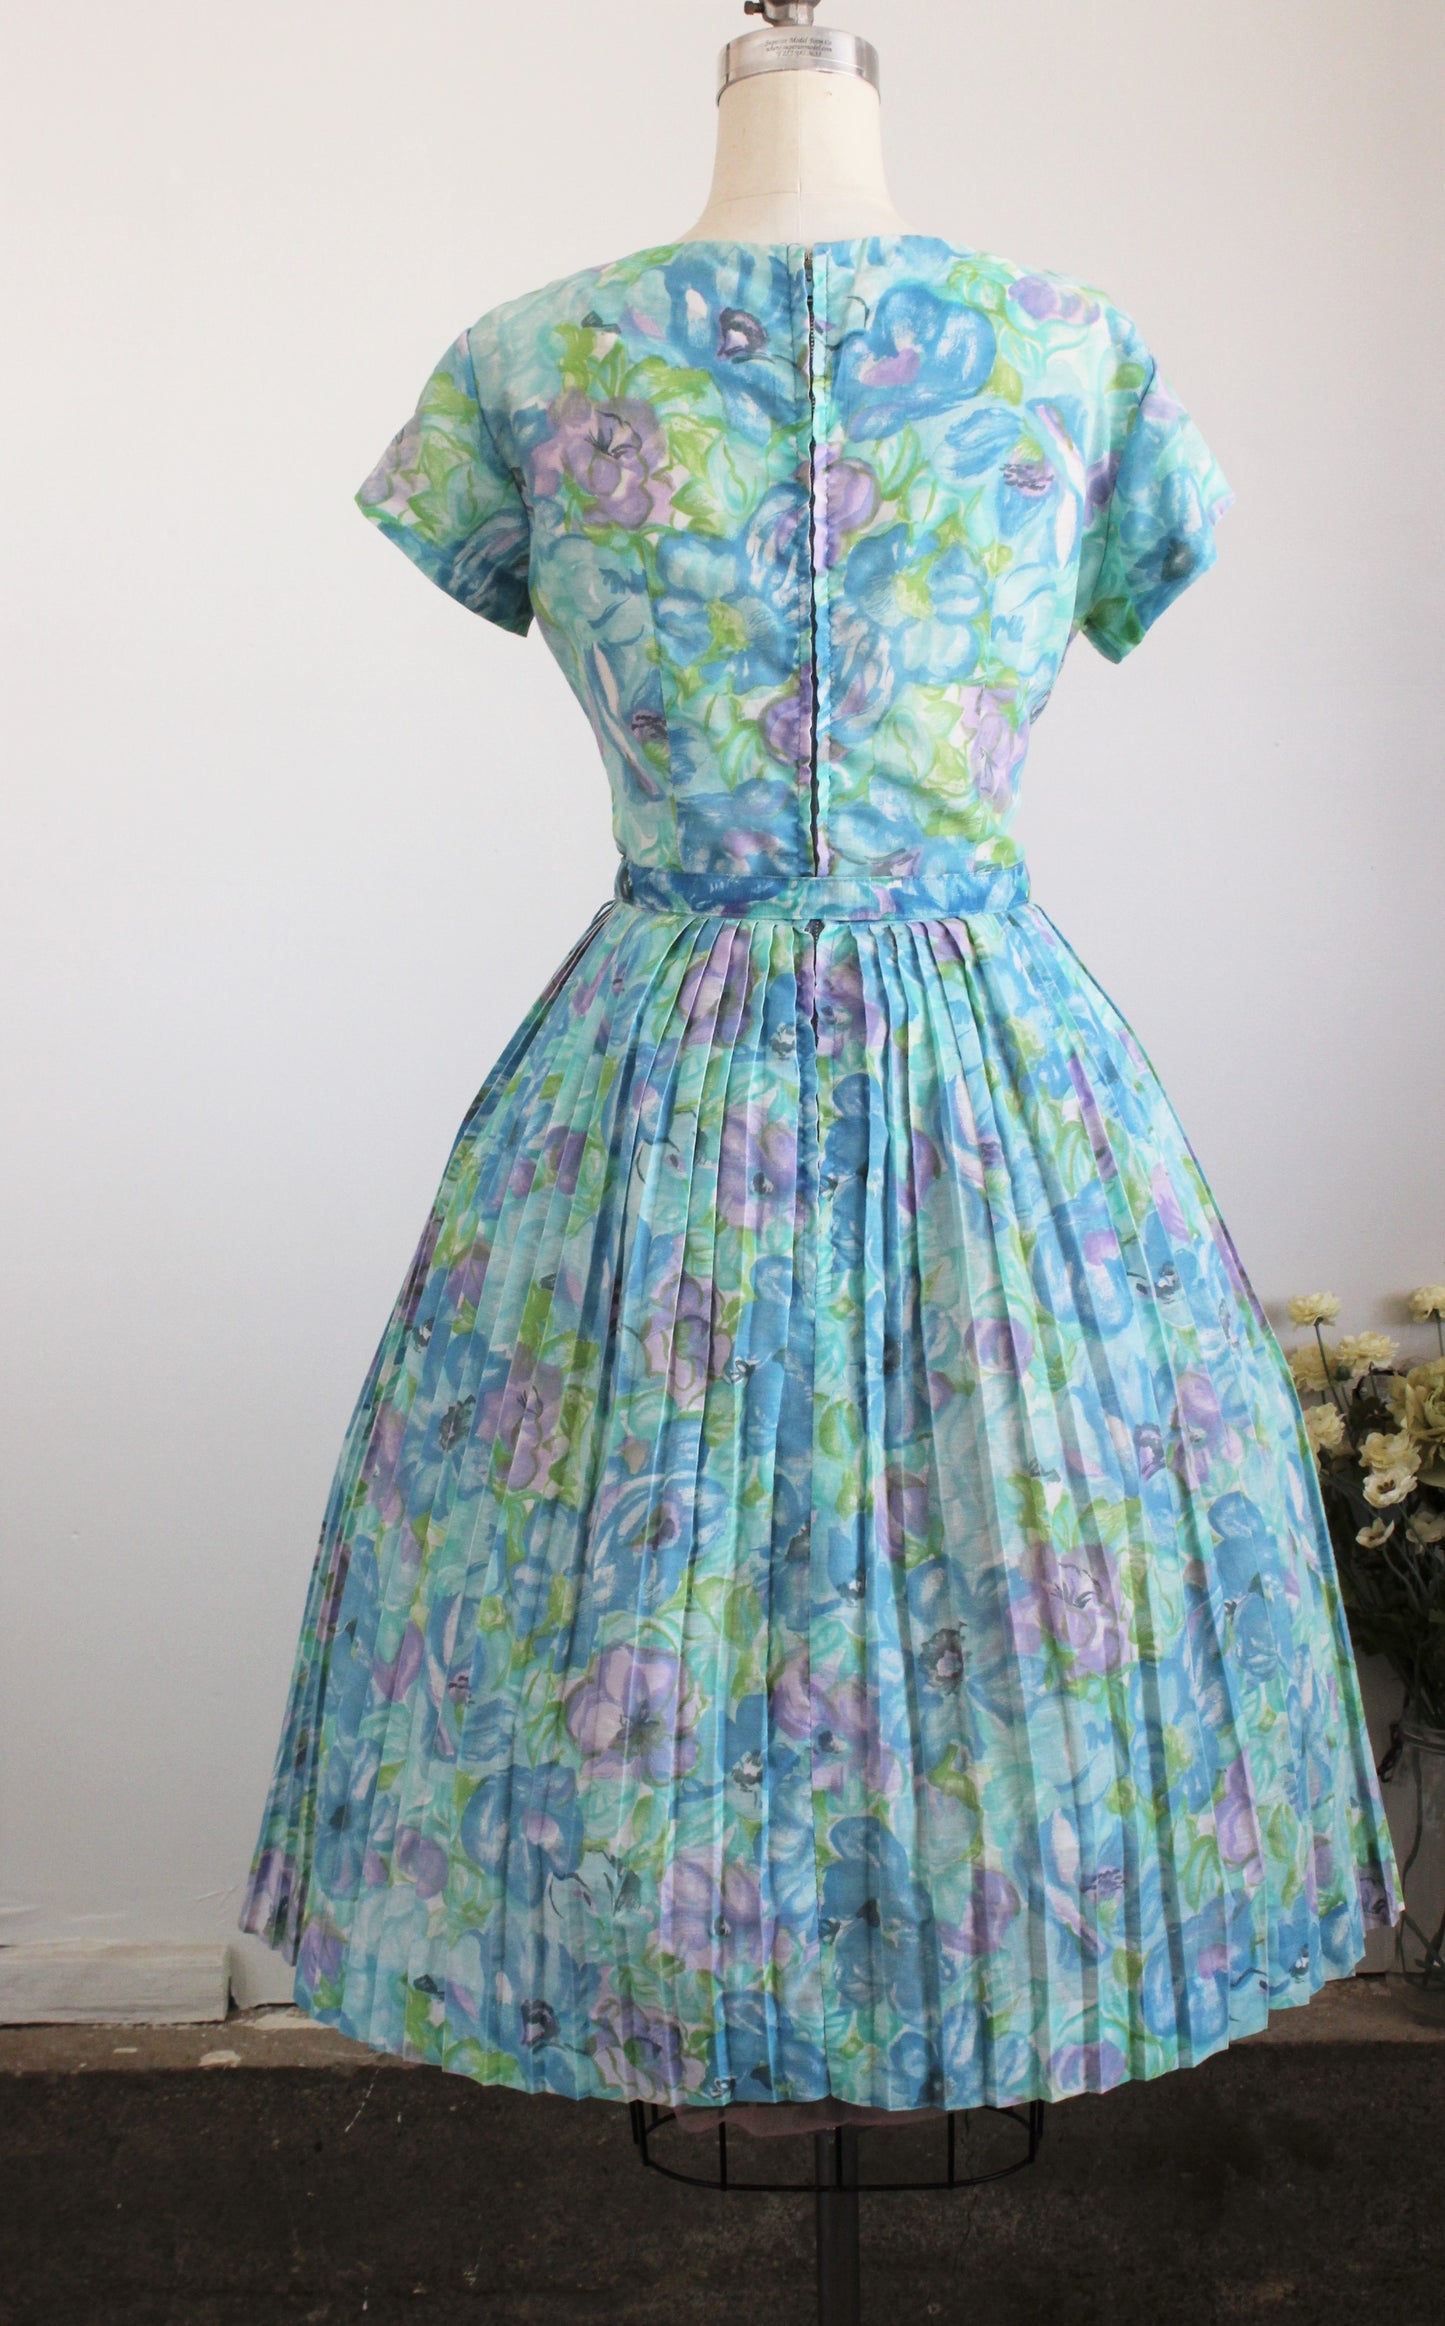 Vintage 1950s Dress With Belt by Mode O Day